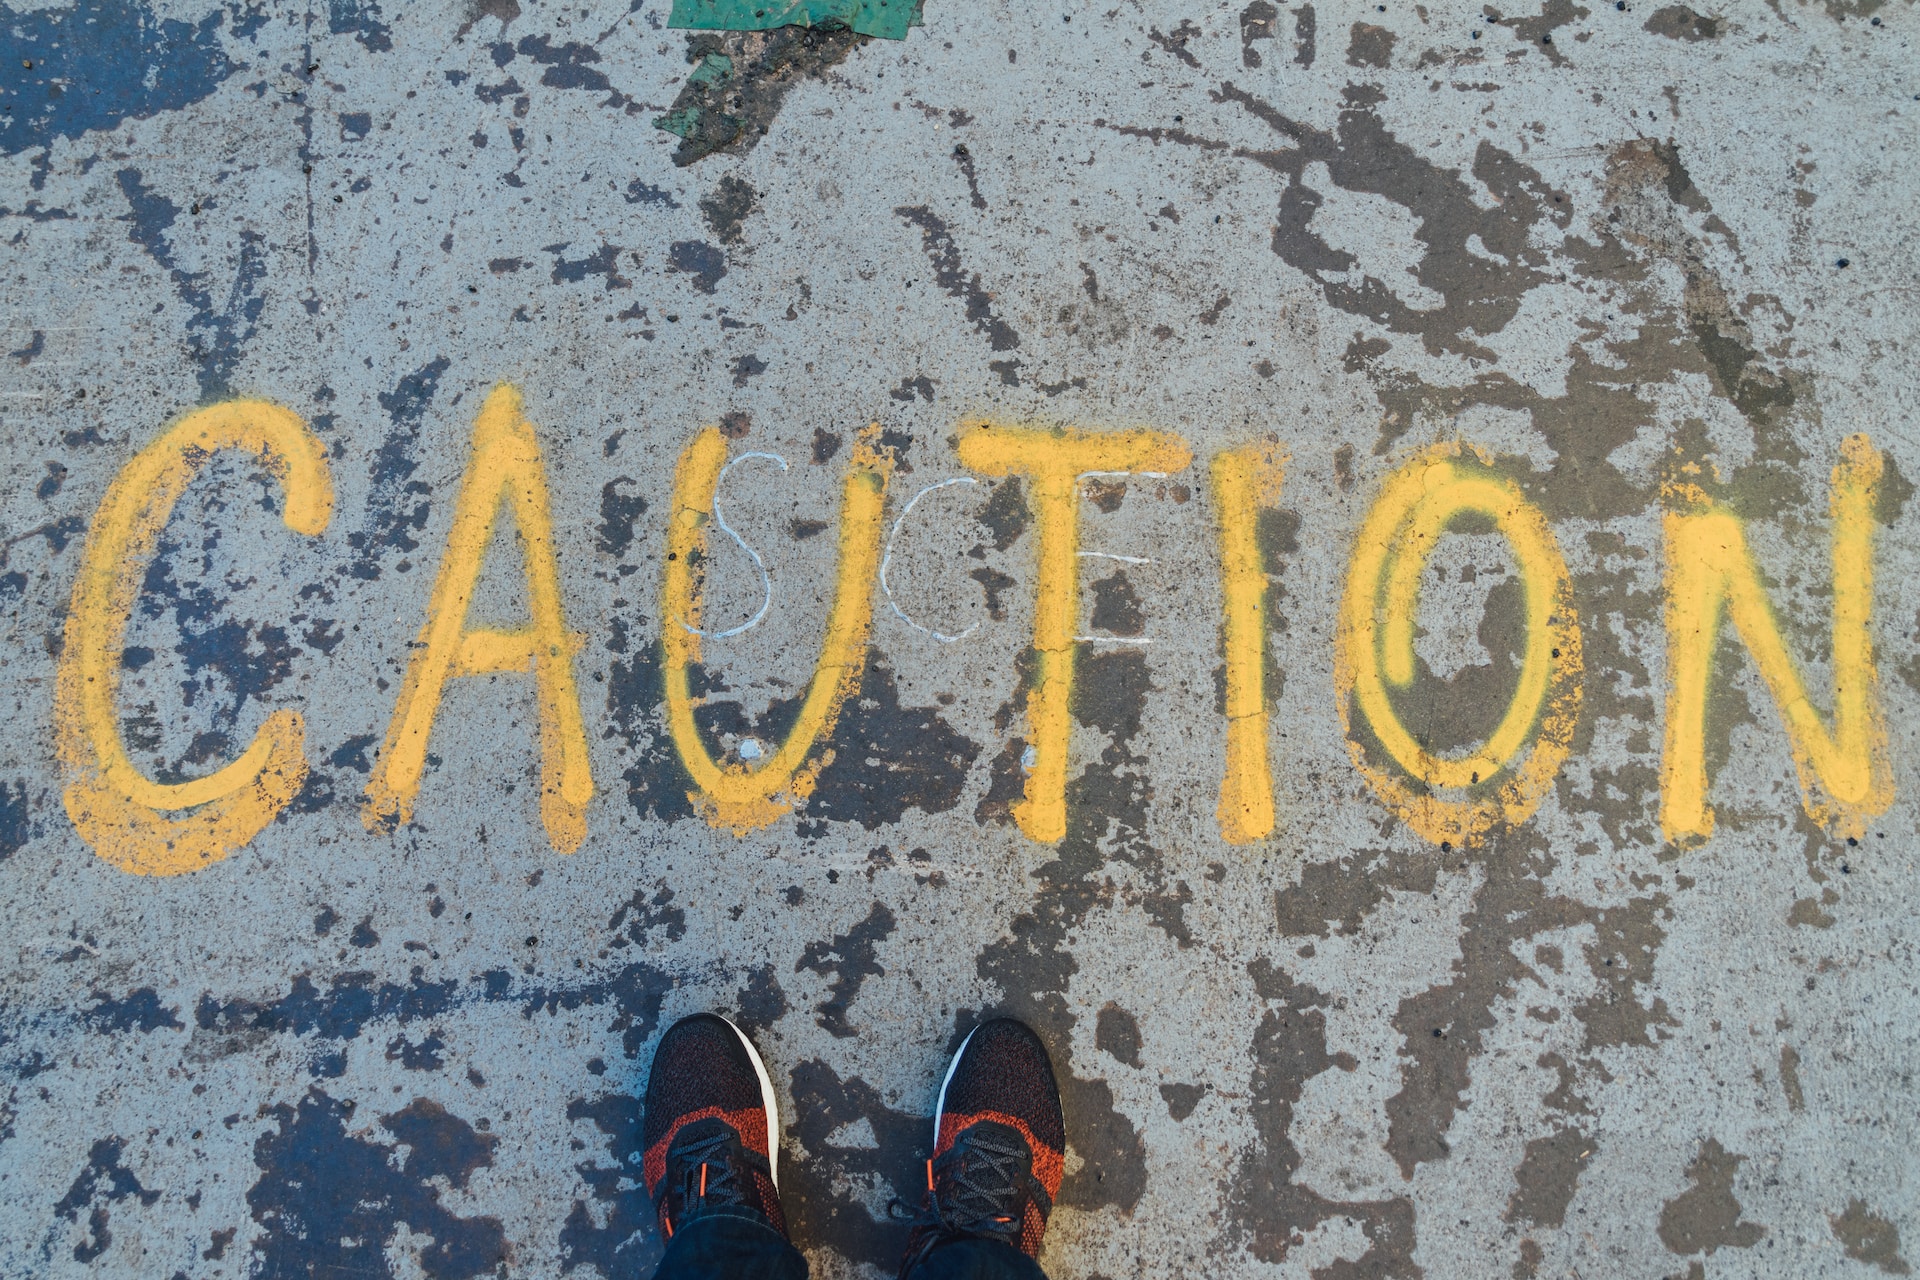 A person's feet in sneakers standing on a street before the word caution written in yellow chalk